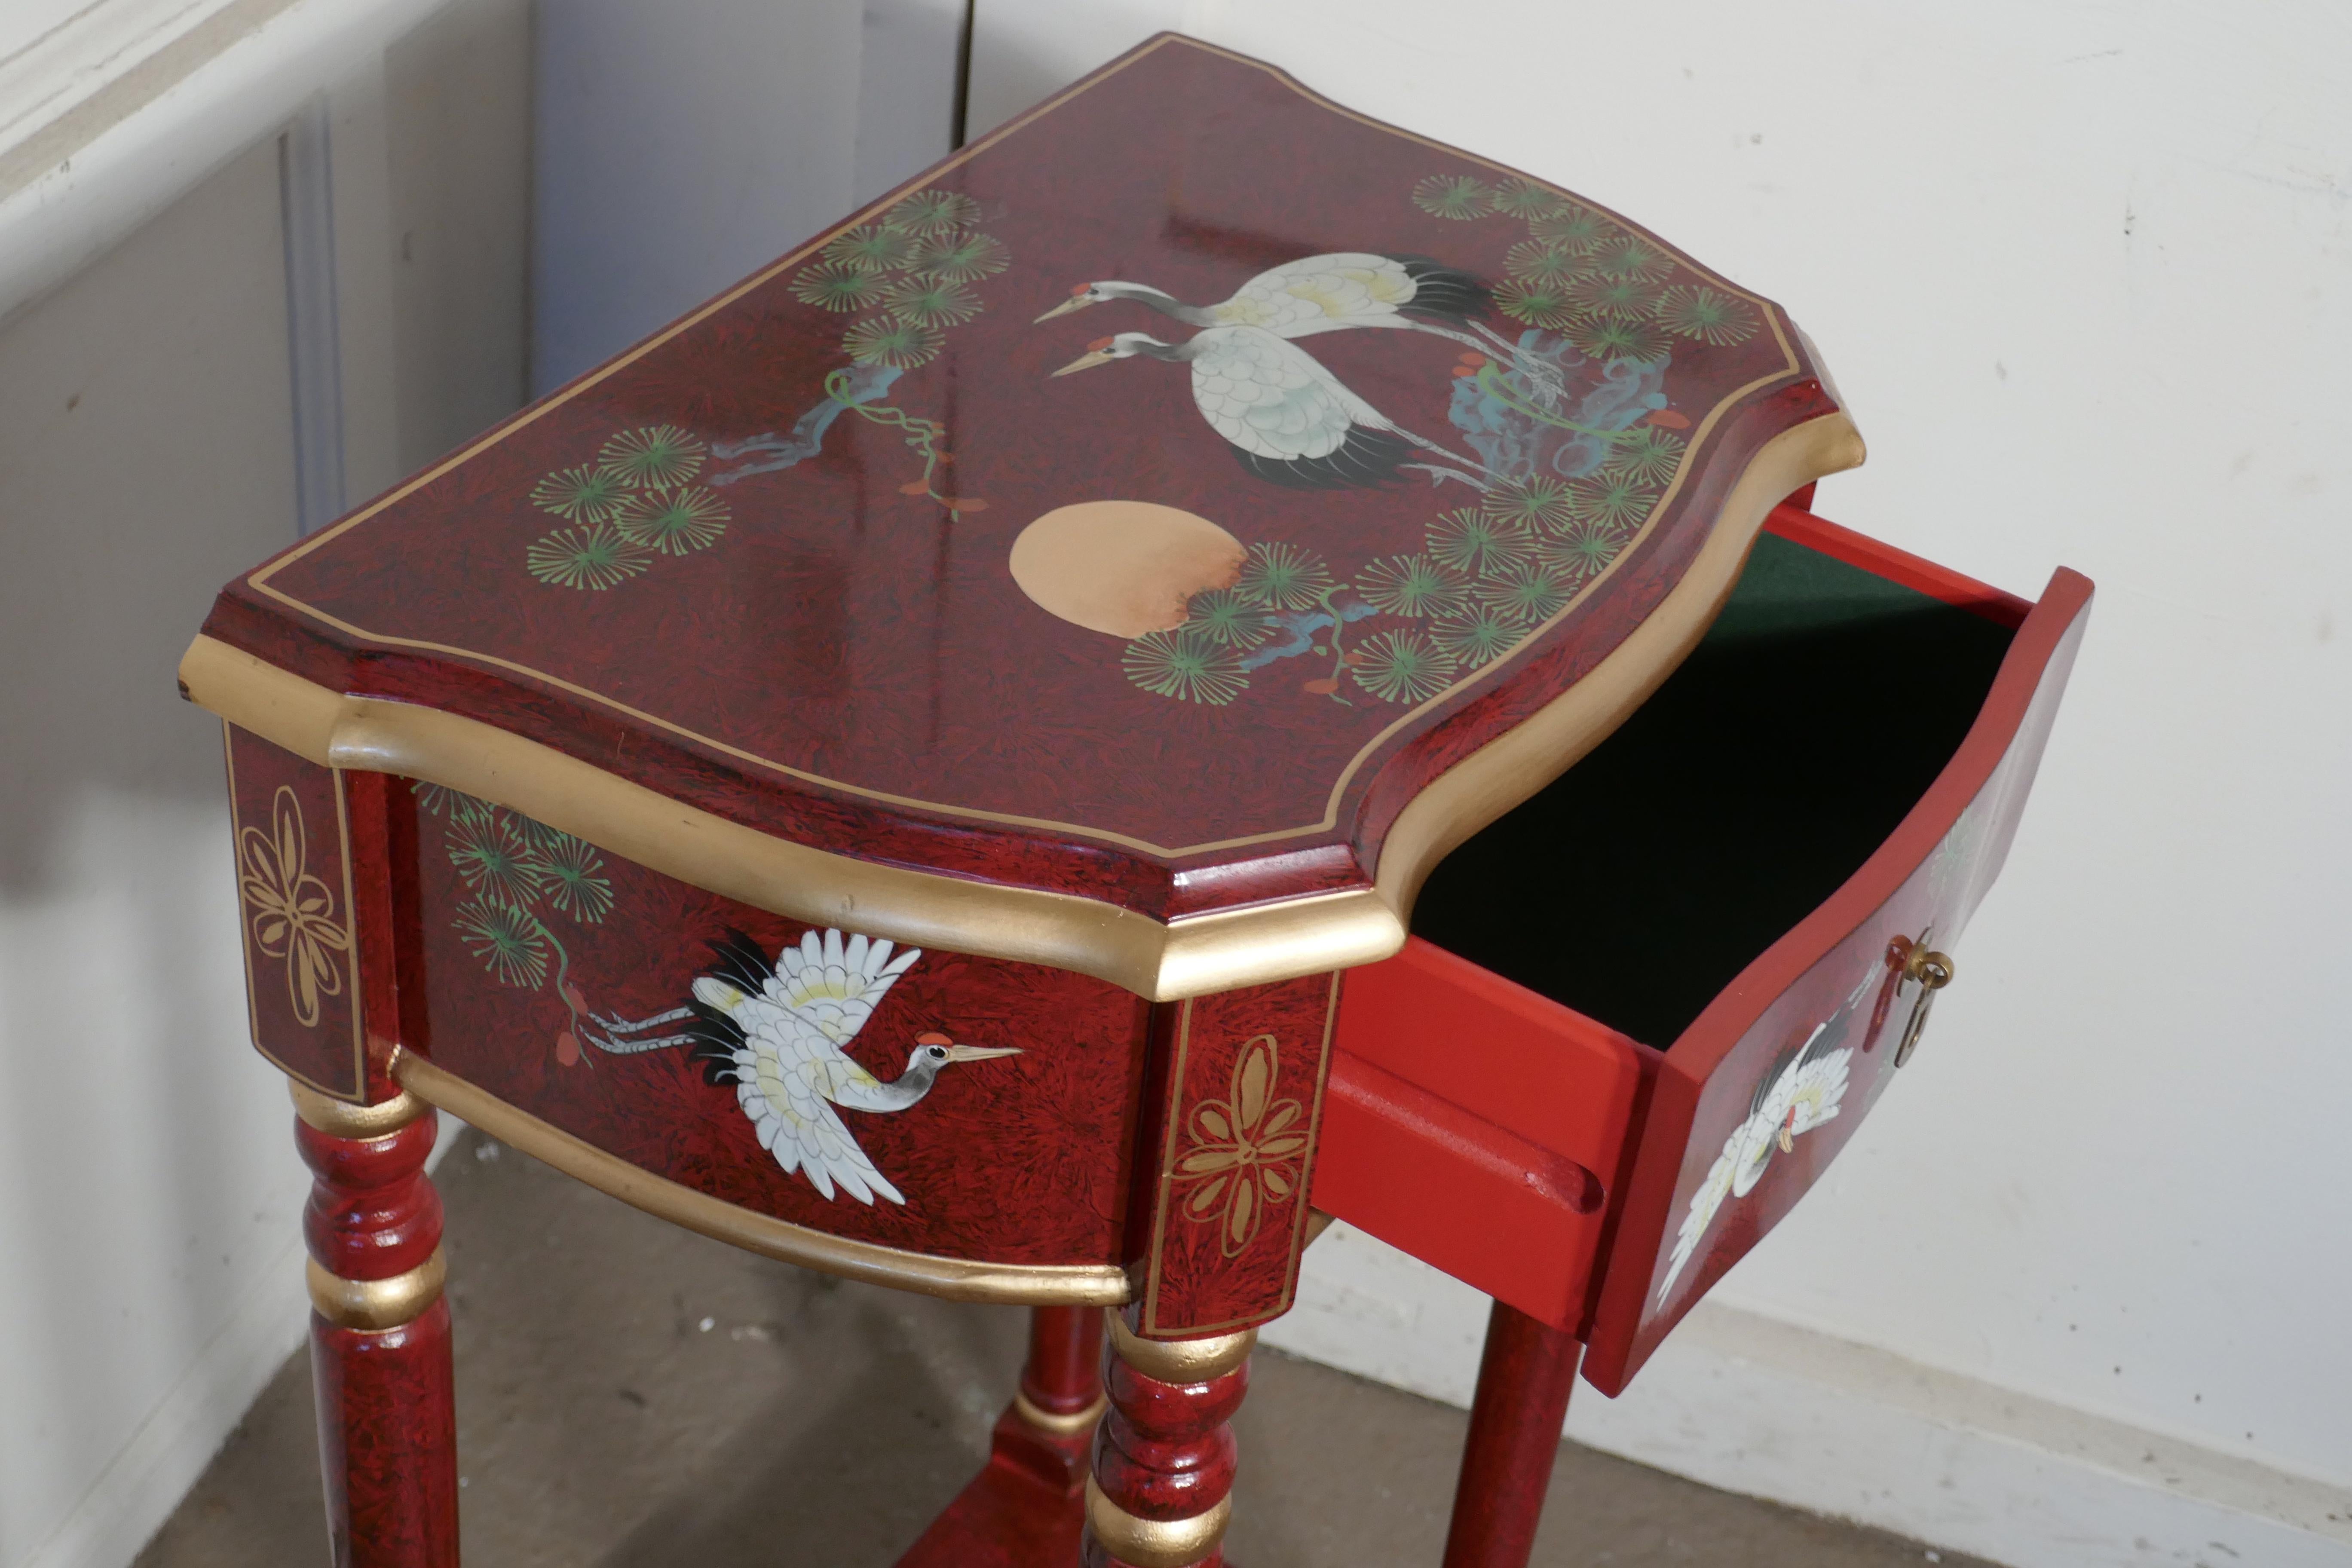 Red Lacquer Chinoiserie Side Table

This is a very auspicious piece, the top of the table has a scene showing 2 Cranes (birds of life) and the Red Rising Sun
It is a tall side table with an under tier and drawer decorated with japanned